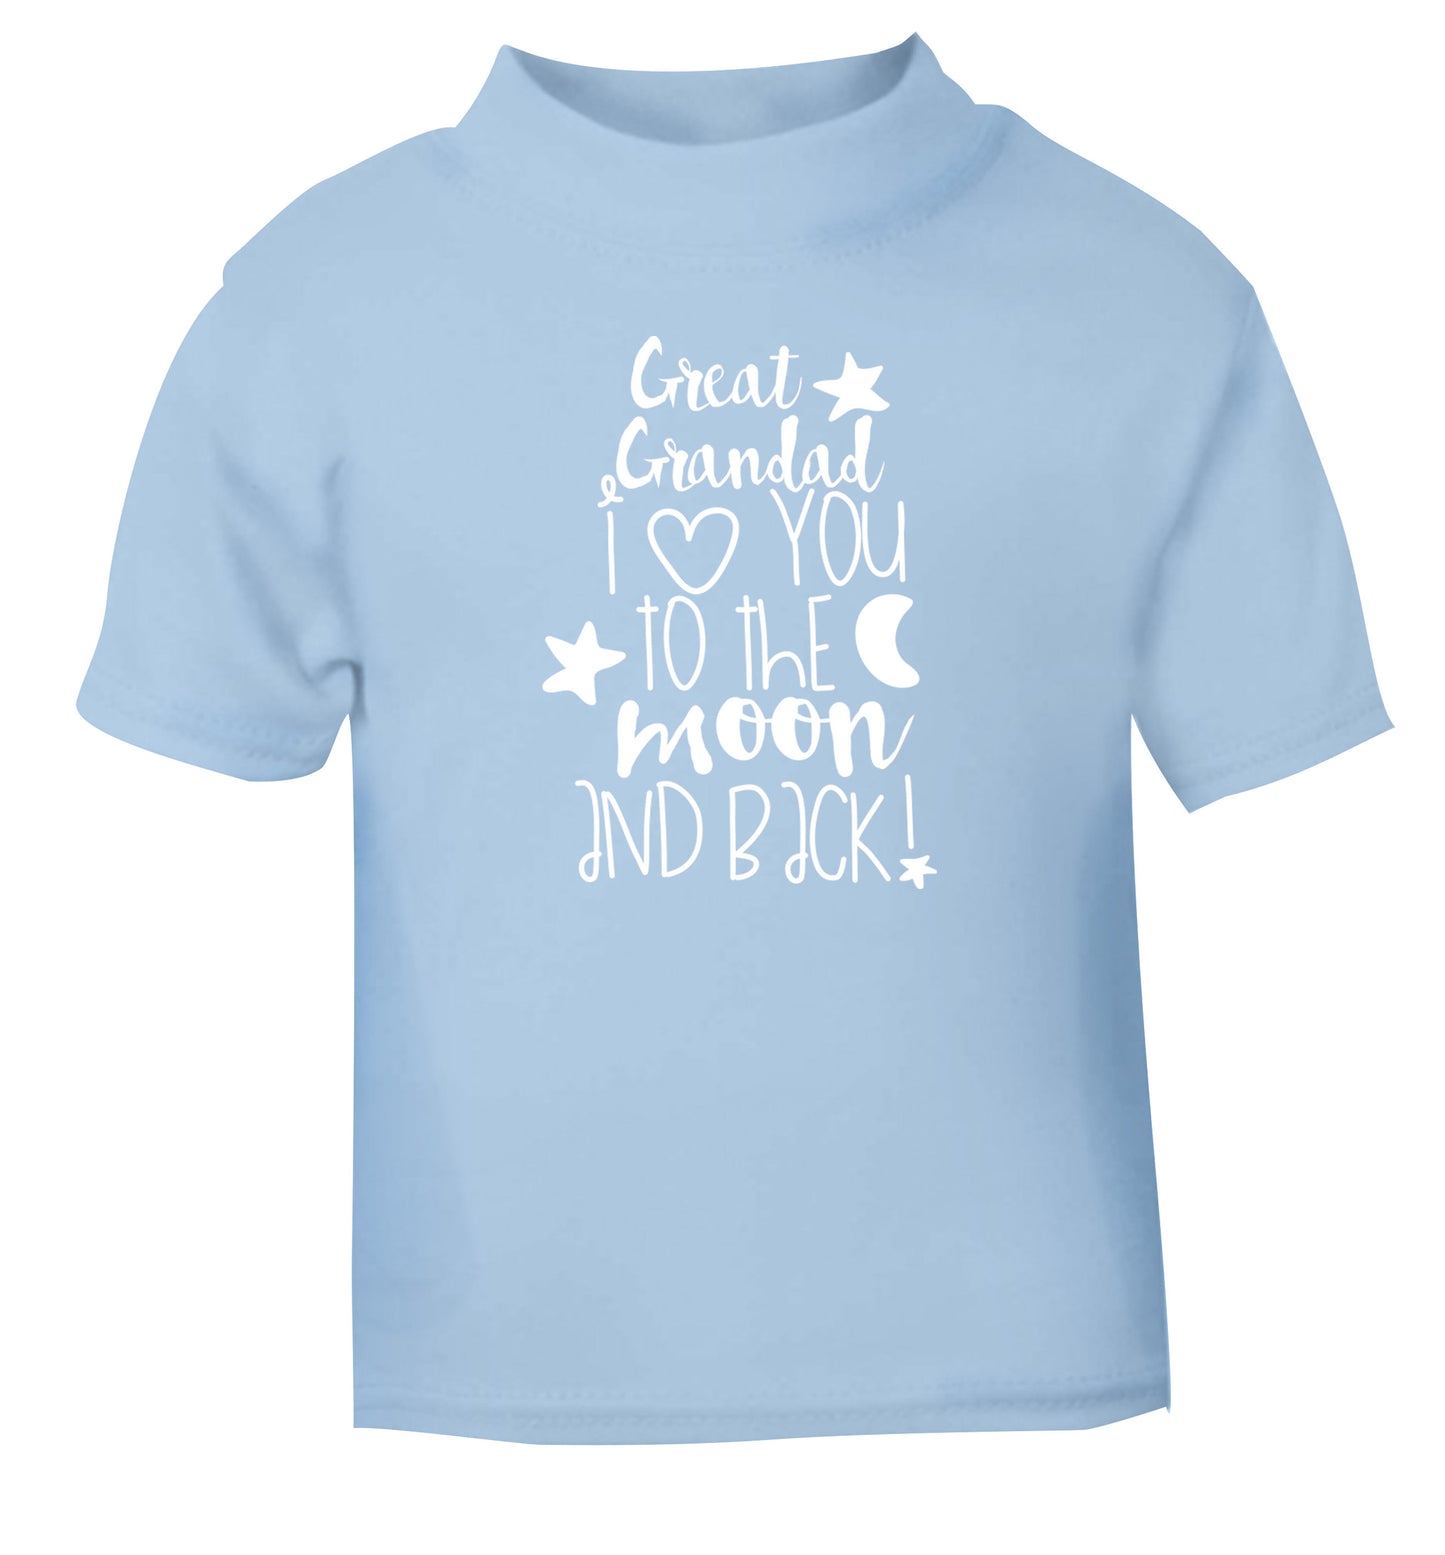 Great Grandad I love you to the moon and back light blue Baby Toddler Tshirt 2 Years